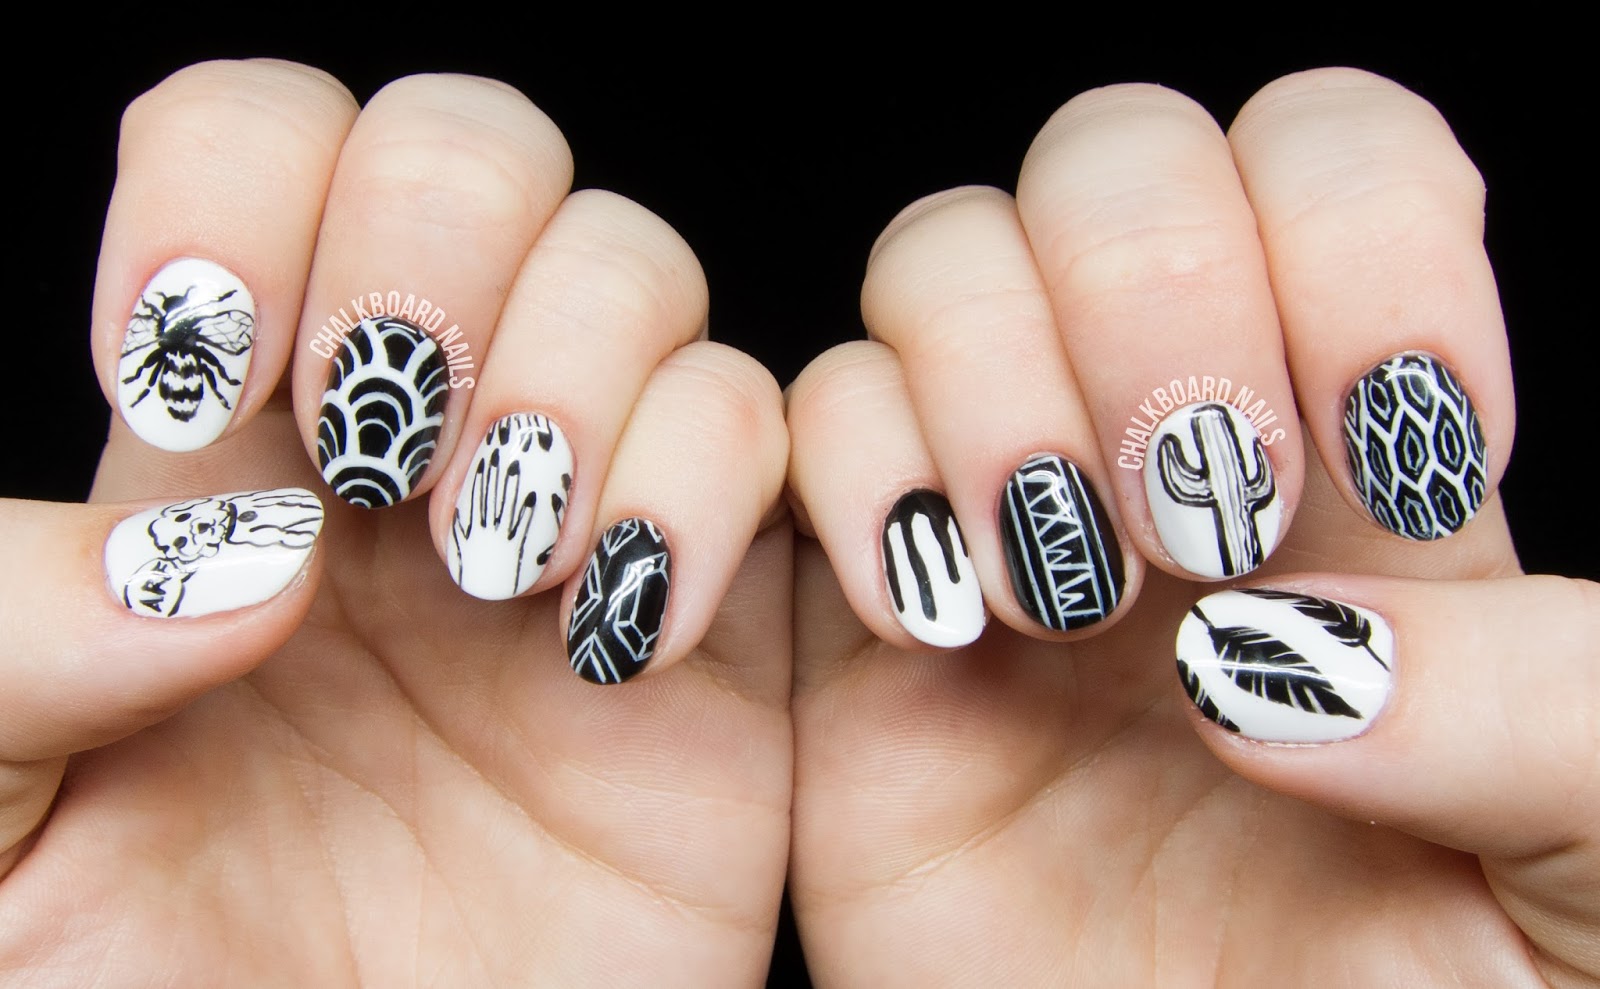 Freehand black and white nail art @chalkboardnails